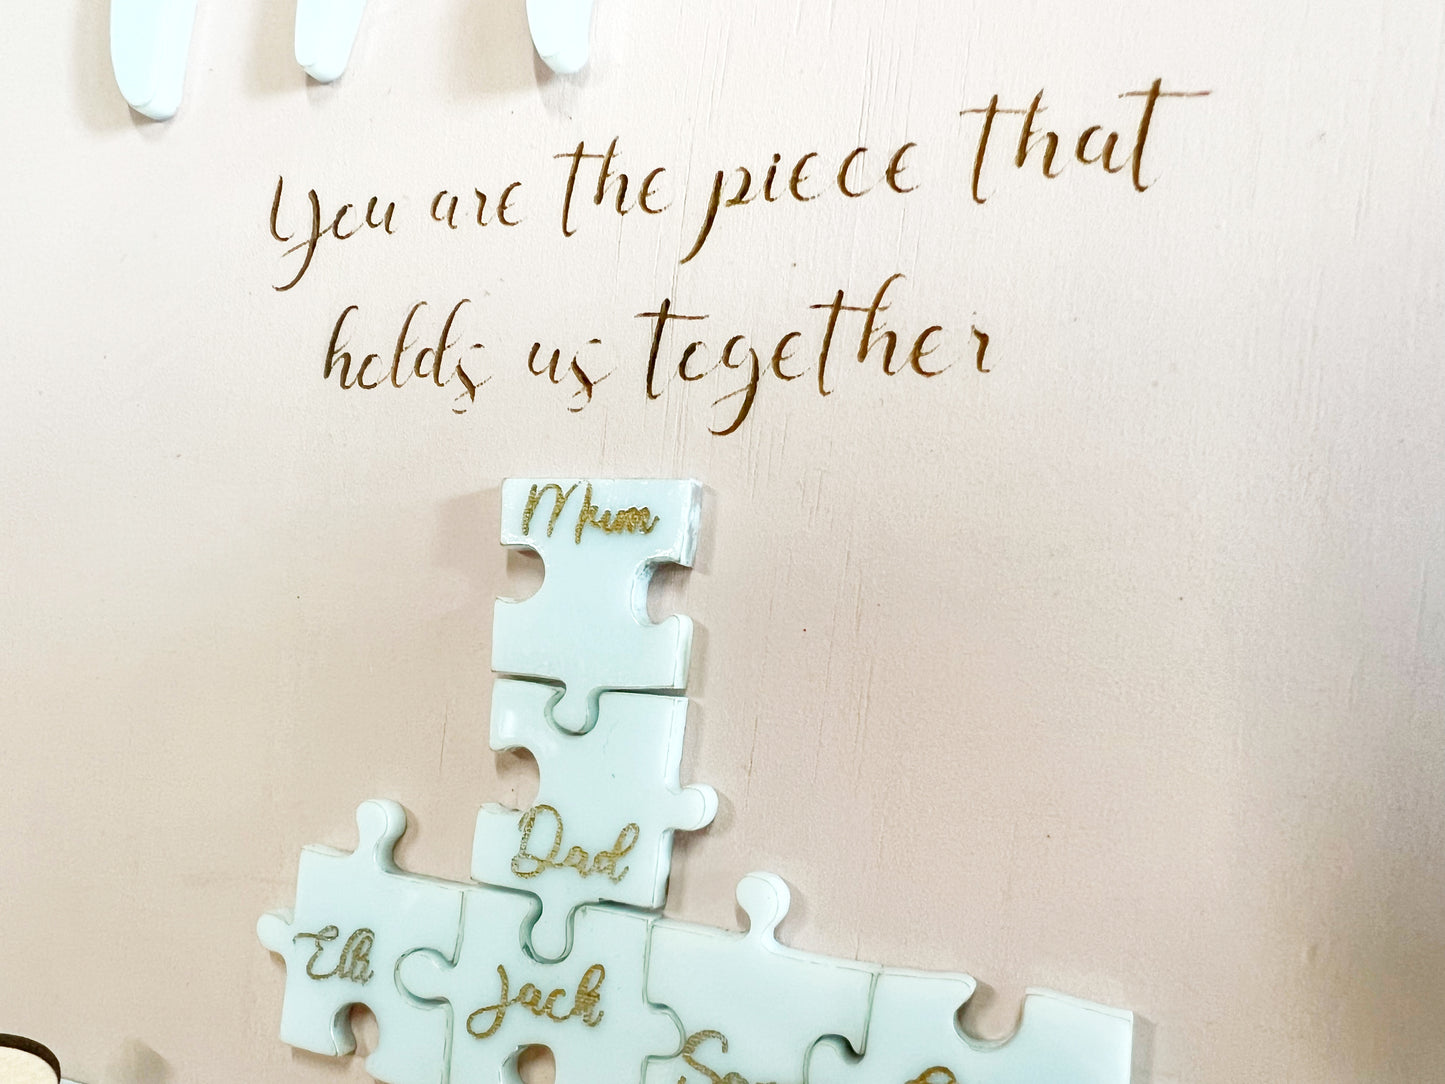 Mums Puzzle Pieces Frame - Mum's hold the pieces together | Design Hut